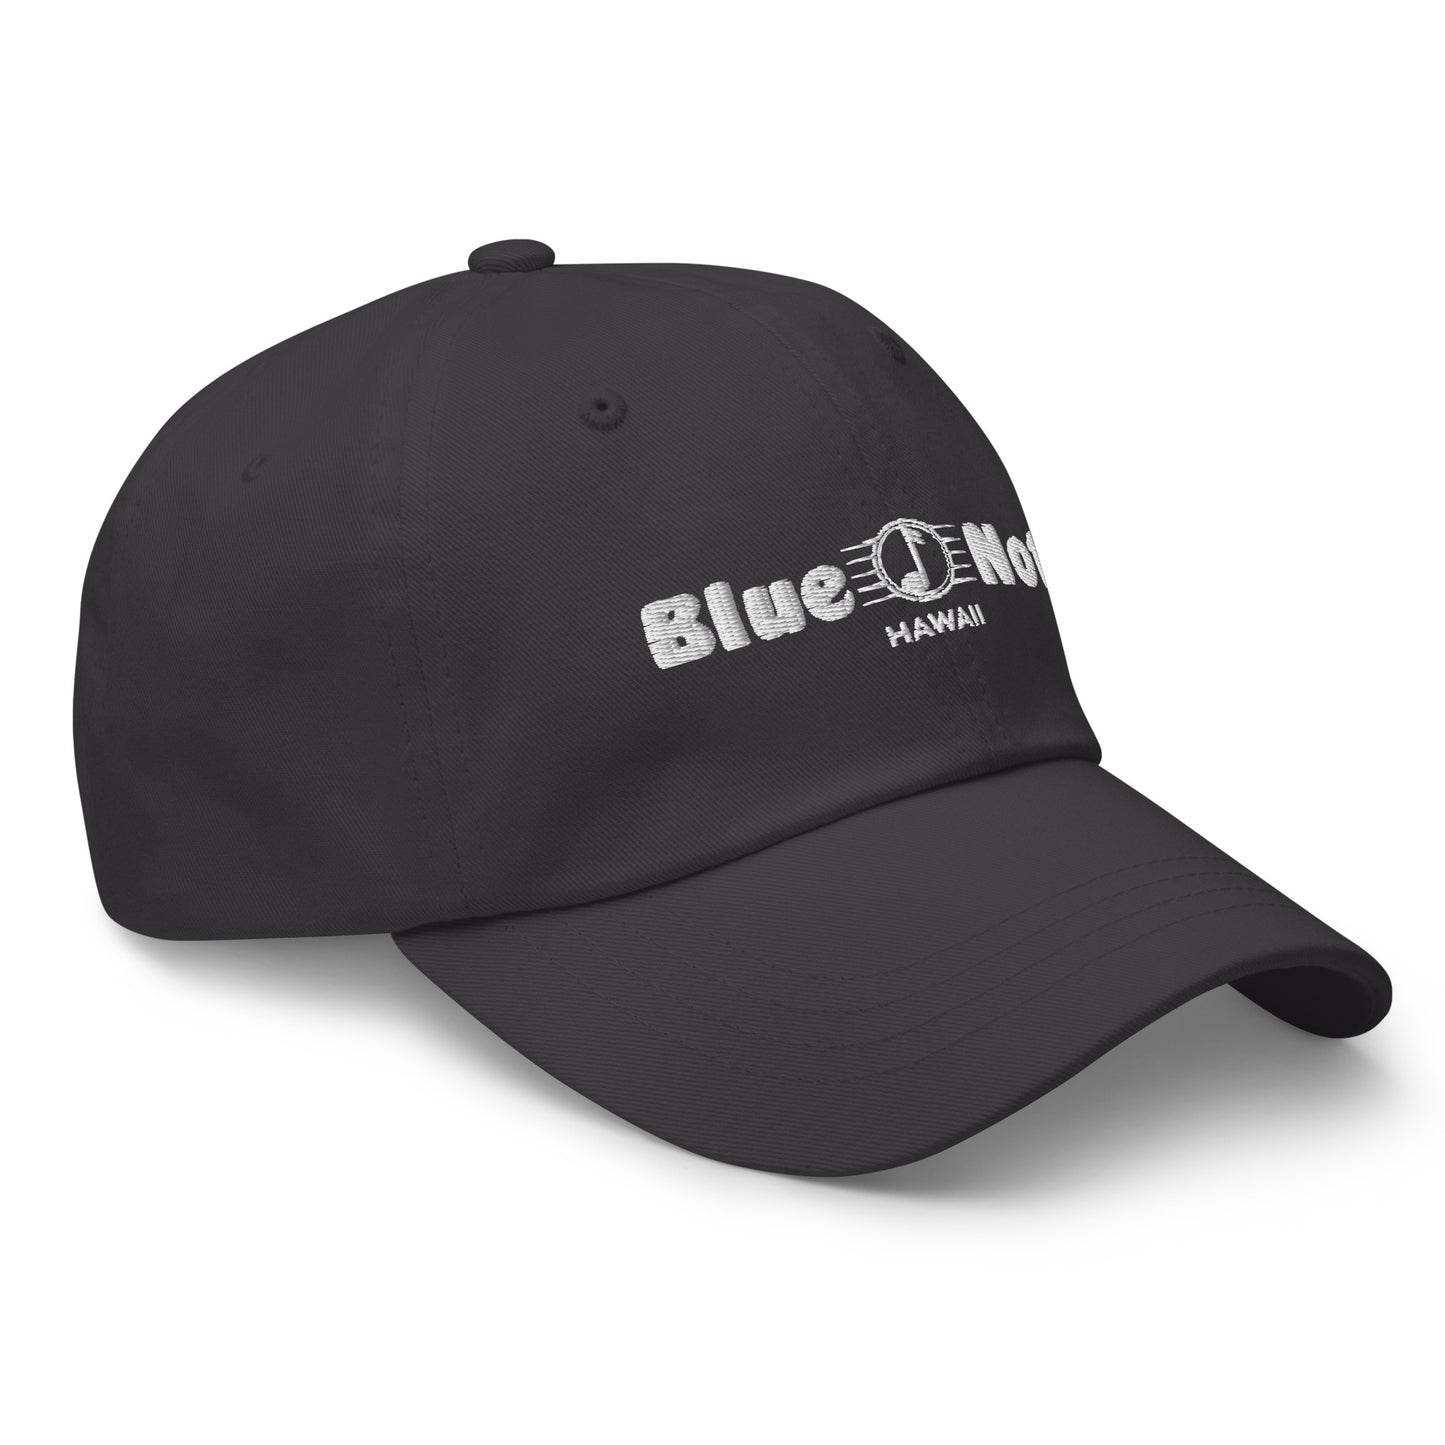 Blue Note Embroidered Dad Hat